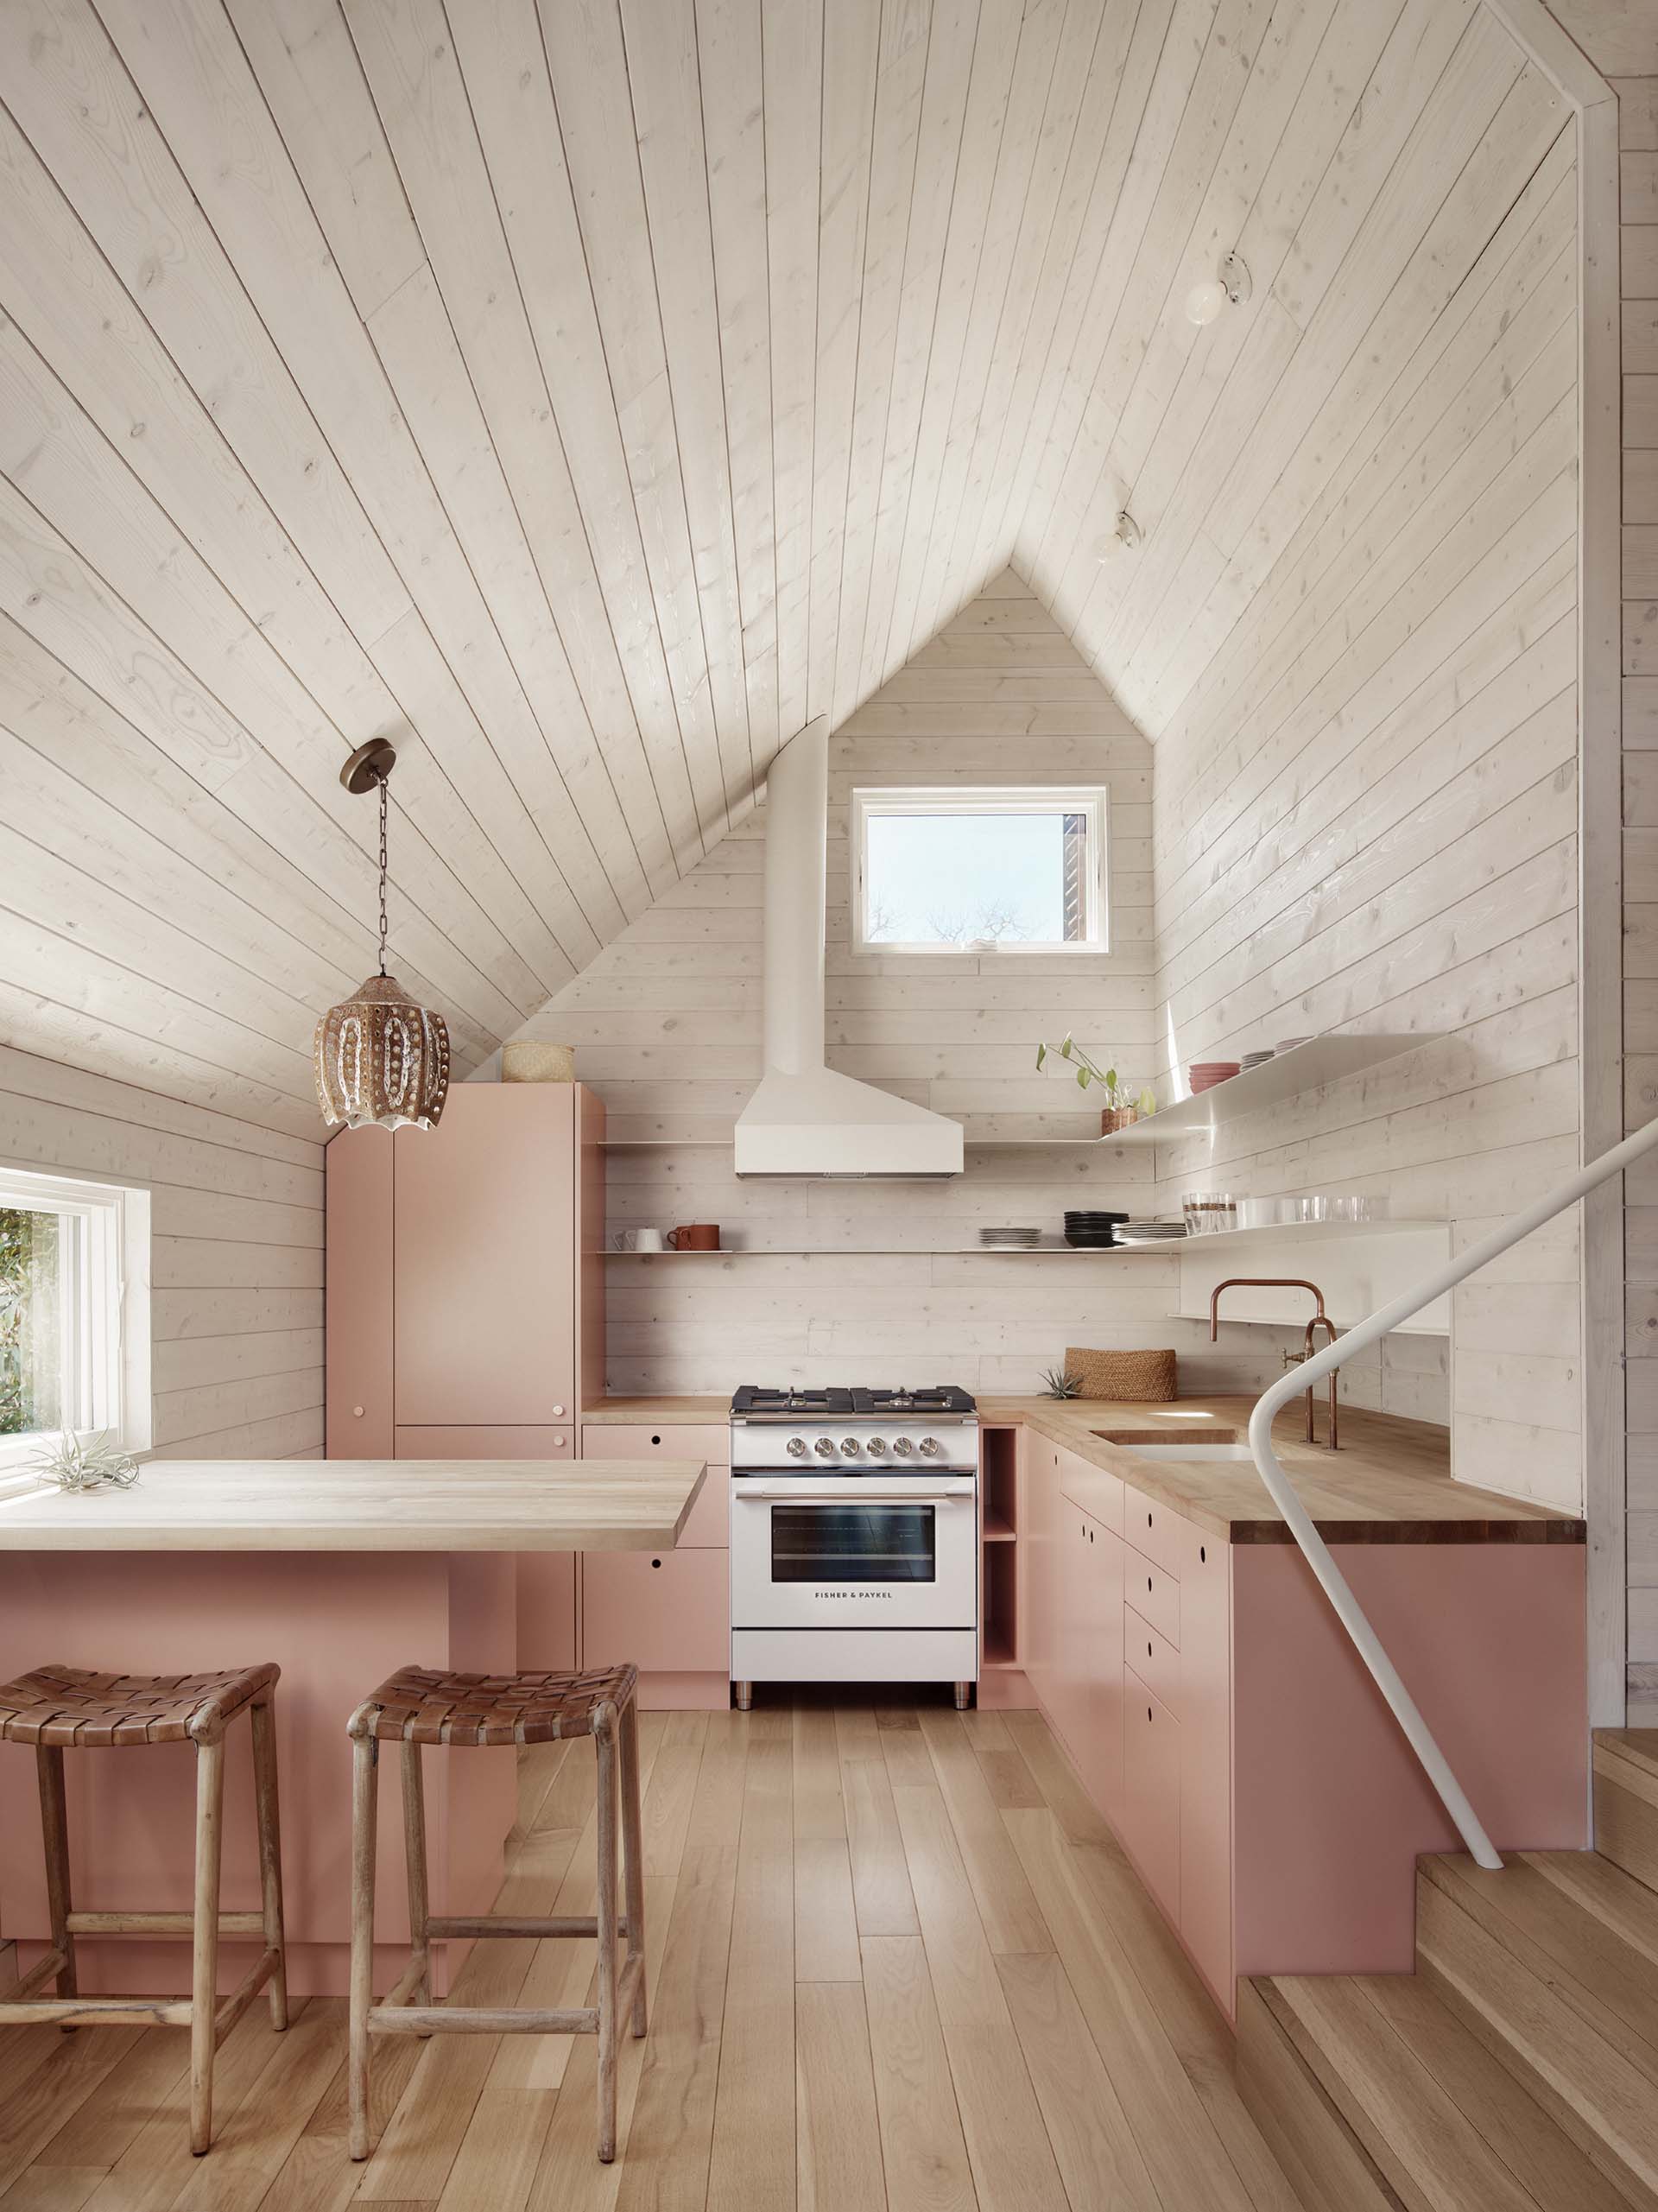 This kitchen features pastel pink cabinets from Ikea have custom-painted fronts, and are topped with off-t،lf Boos butcher block countertops.